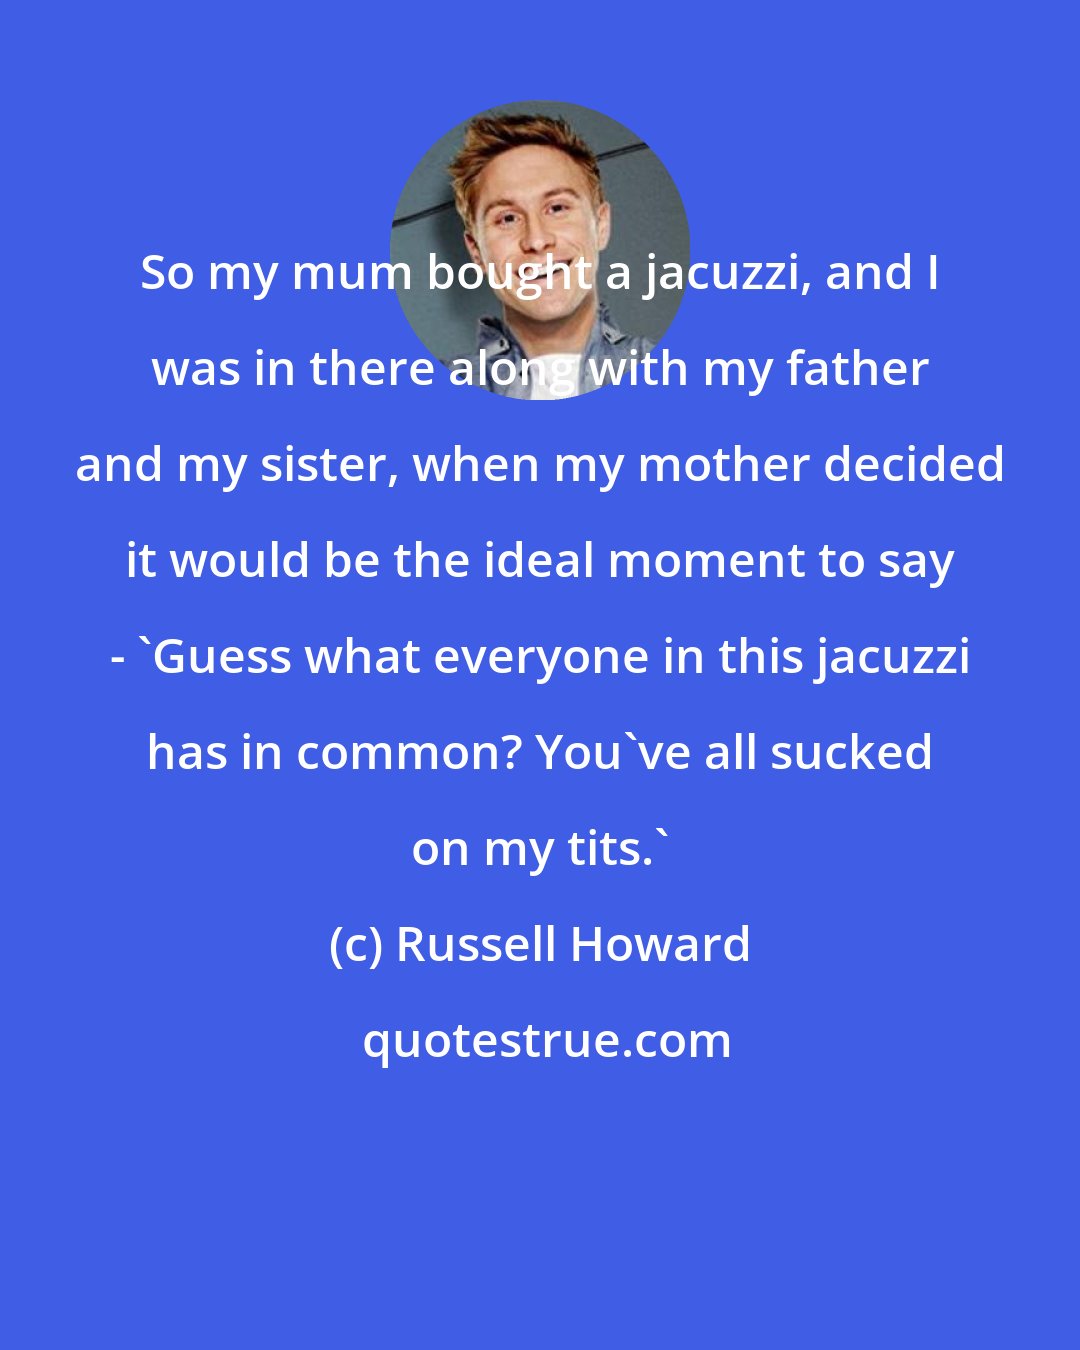 Russell Howard: So my mum bought a jacuzzi, and I was in there along with my father and my sister, when my mother decided it would be the ideal moment to say - 'Guess what everyone in this jacuzzi has in common? You've all sucked on my tits.'